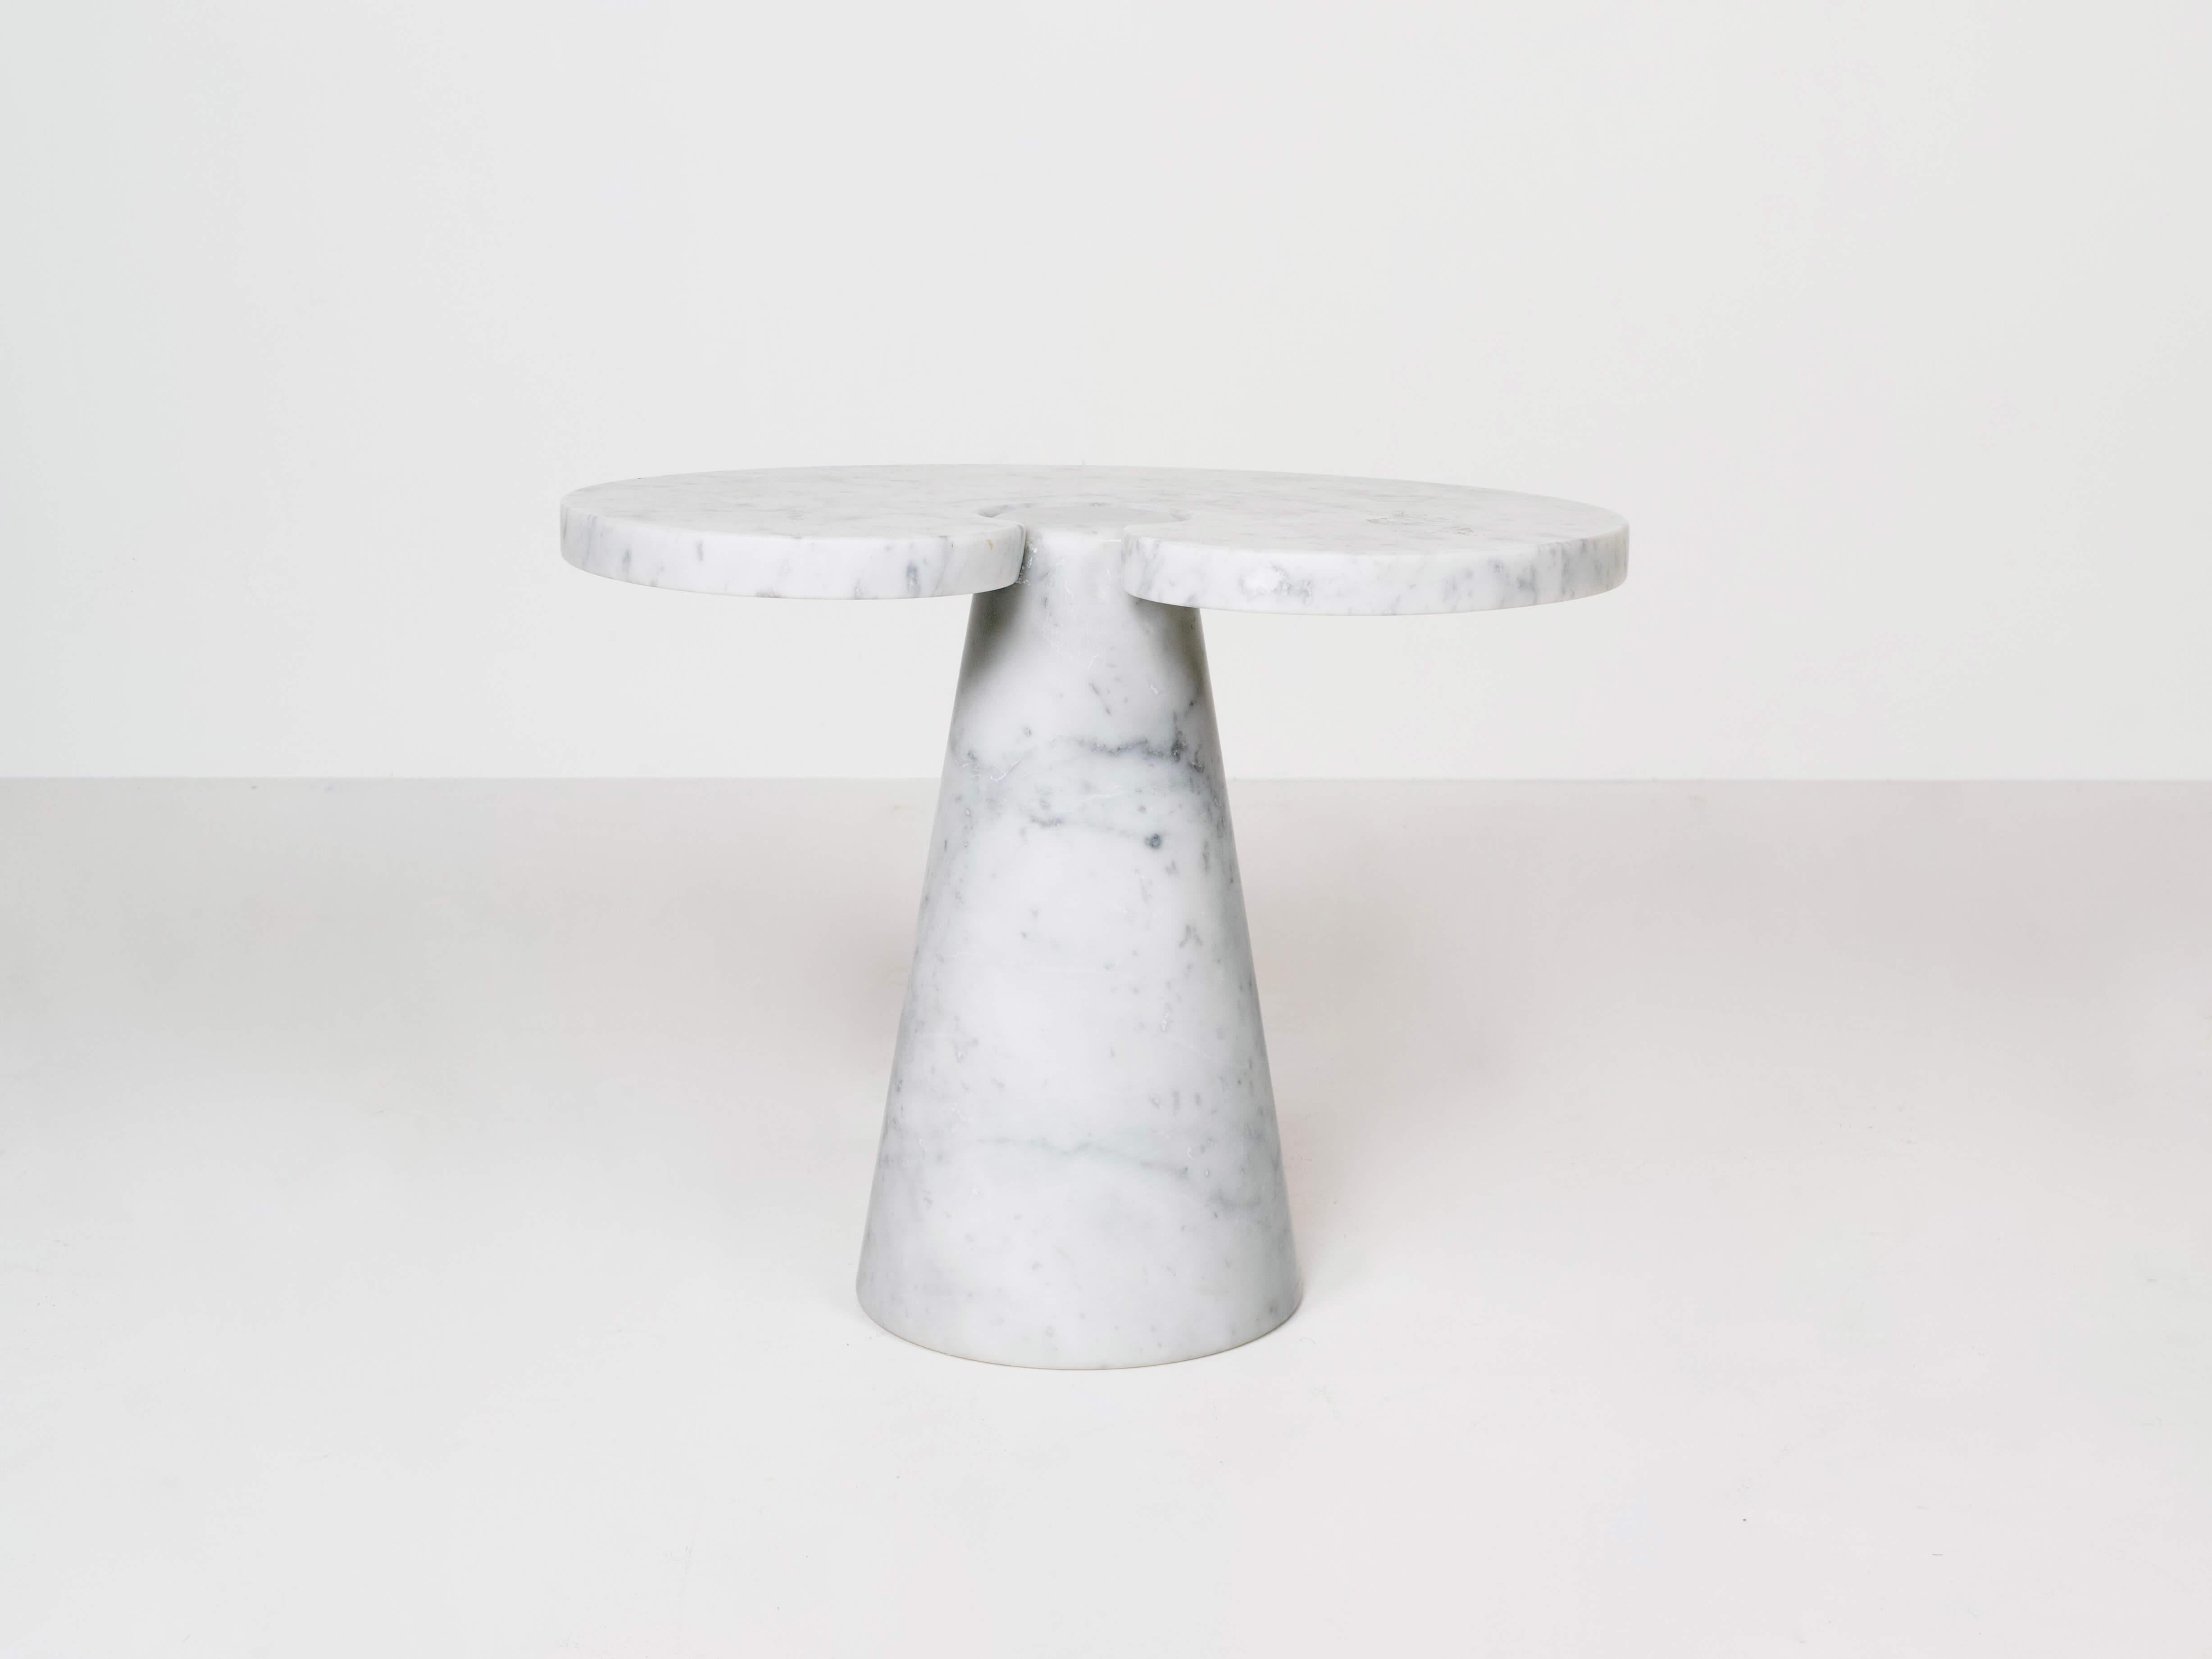 Amazing marble side- or coffee table in Angelo Mangiarotti style from Italy 1970s. This table made of Carrara Marble has the same design as Mangiarotti's design for Skipper from the 'Eros' series. The table consists of a cone shaped leg out of one